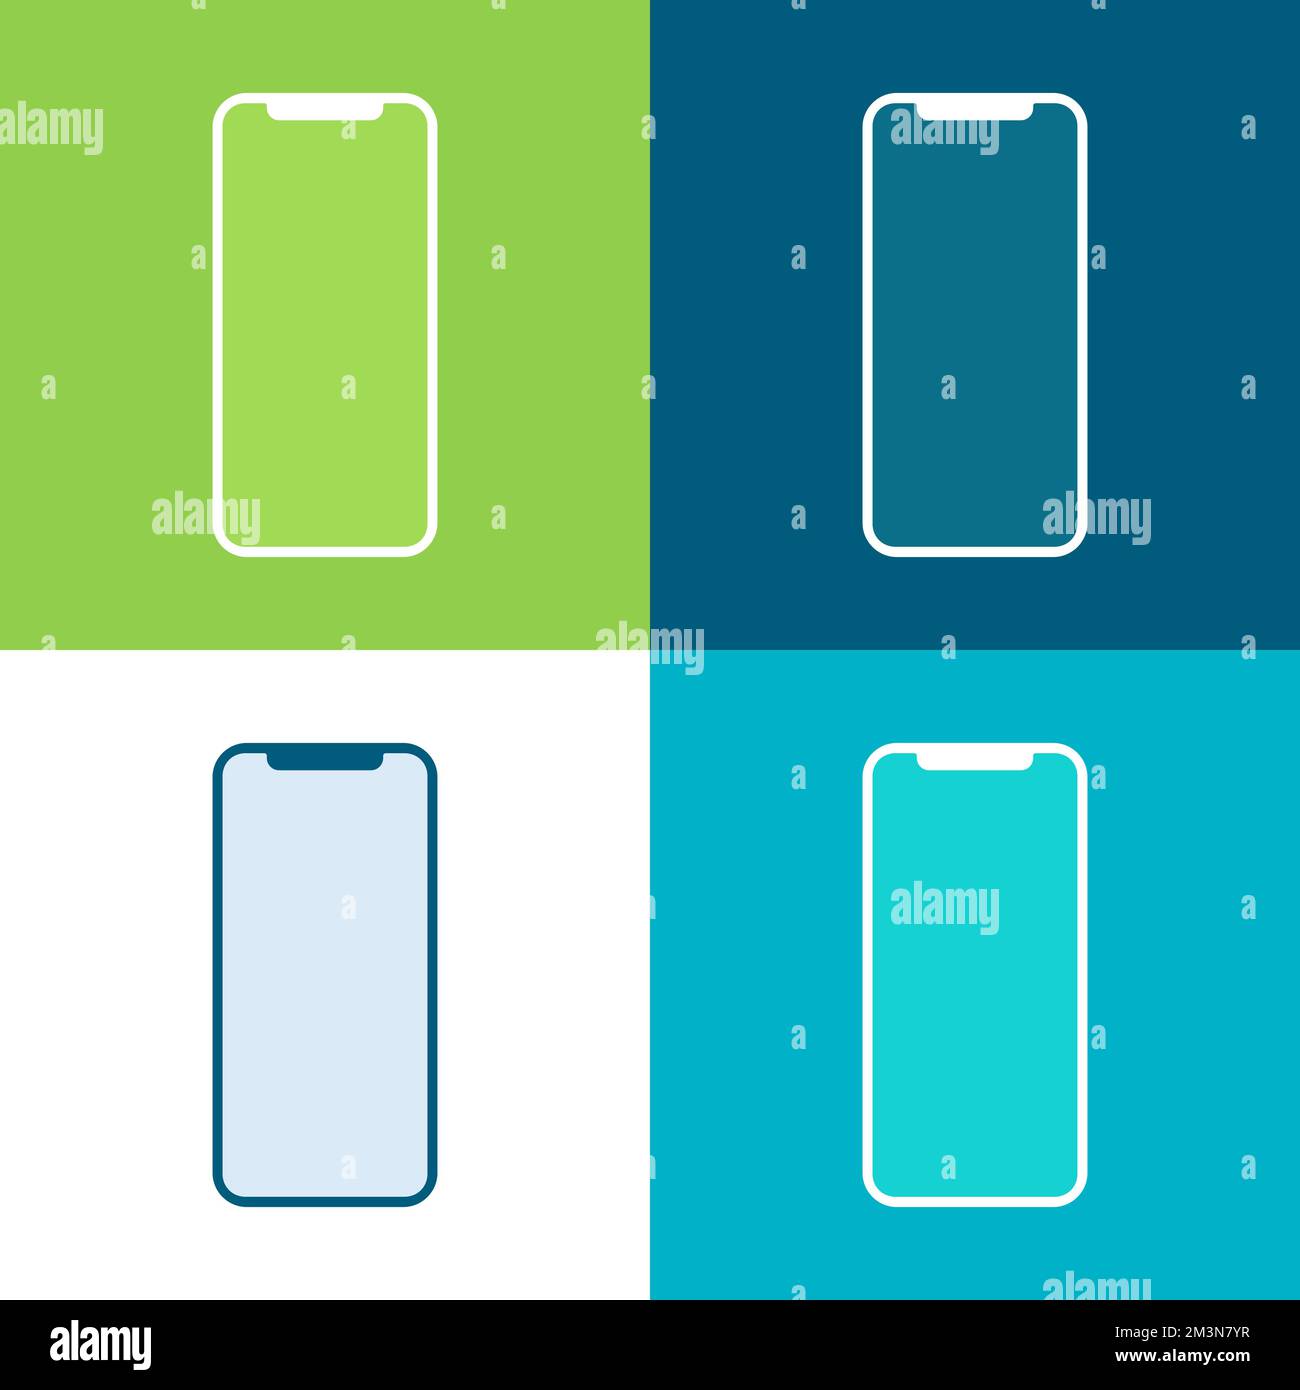 Smartphone icons. Mobile phone icon on different backgrounds. Cellphone screen vector illustration Stock Vector